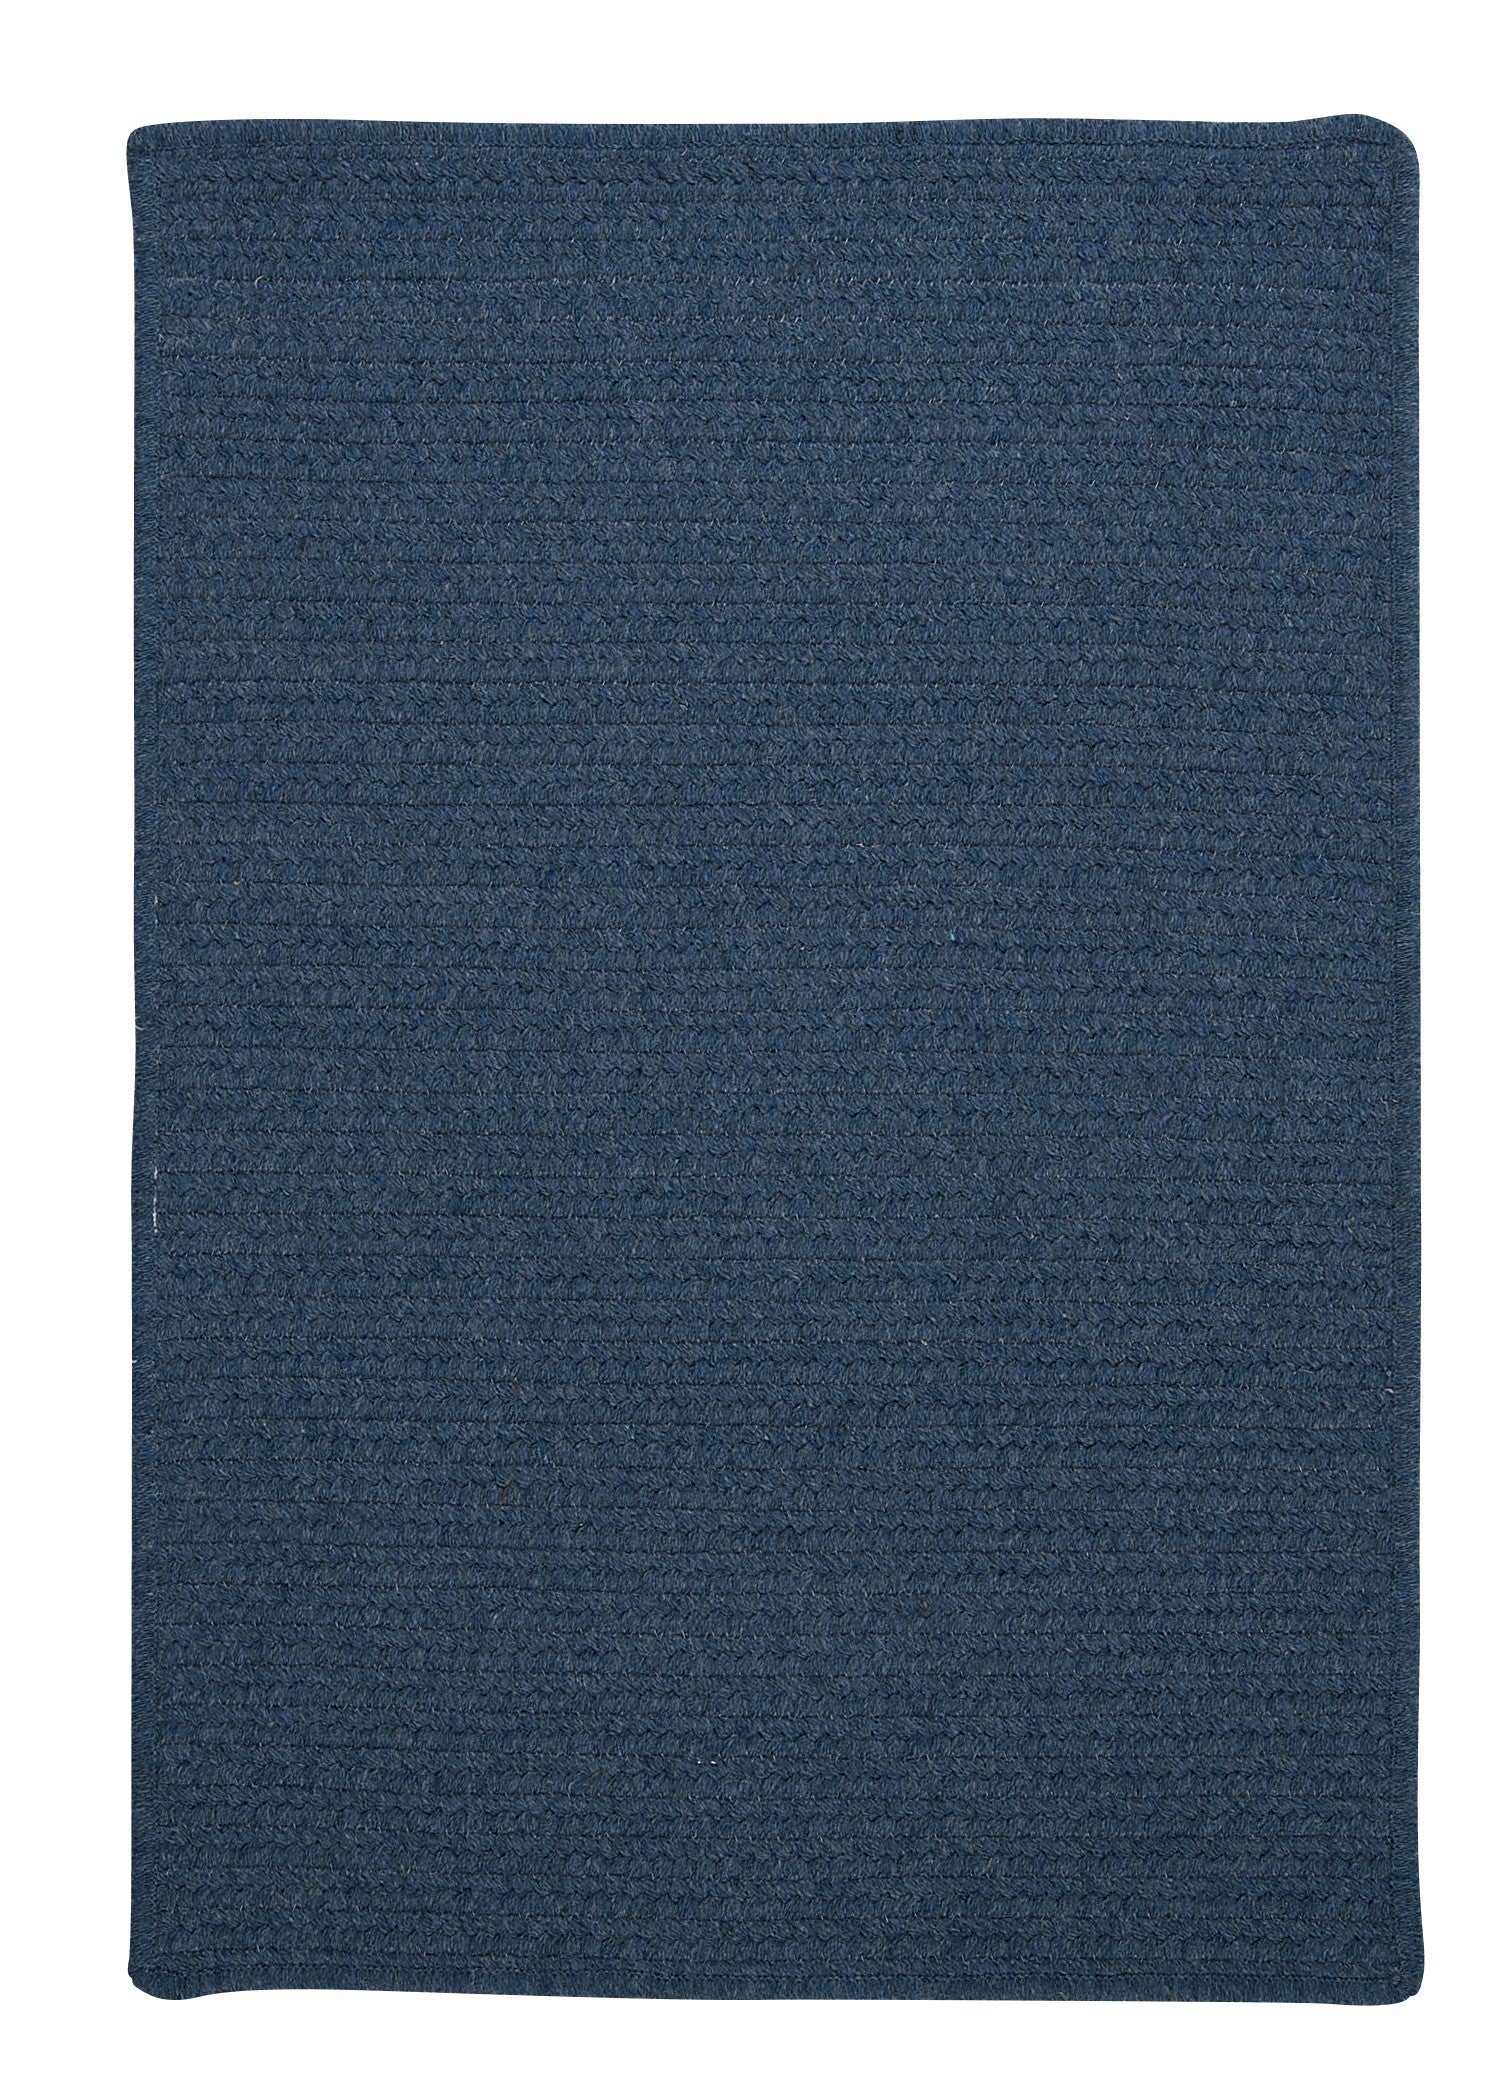 Colonial Mills Westminster WM50 Federal Blue Traditional Area Rug